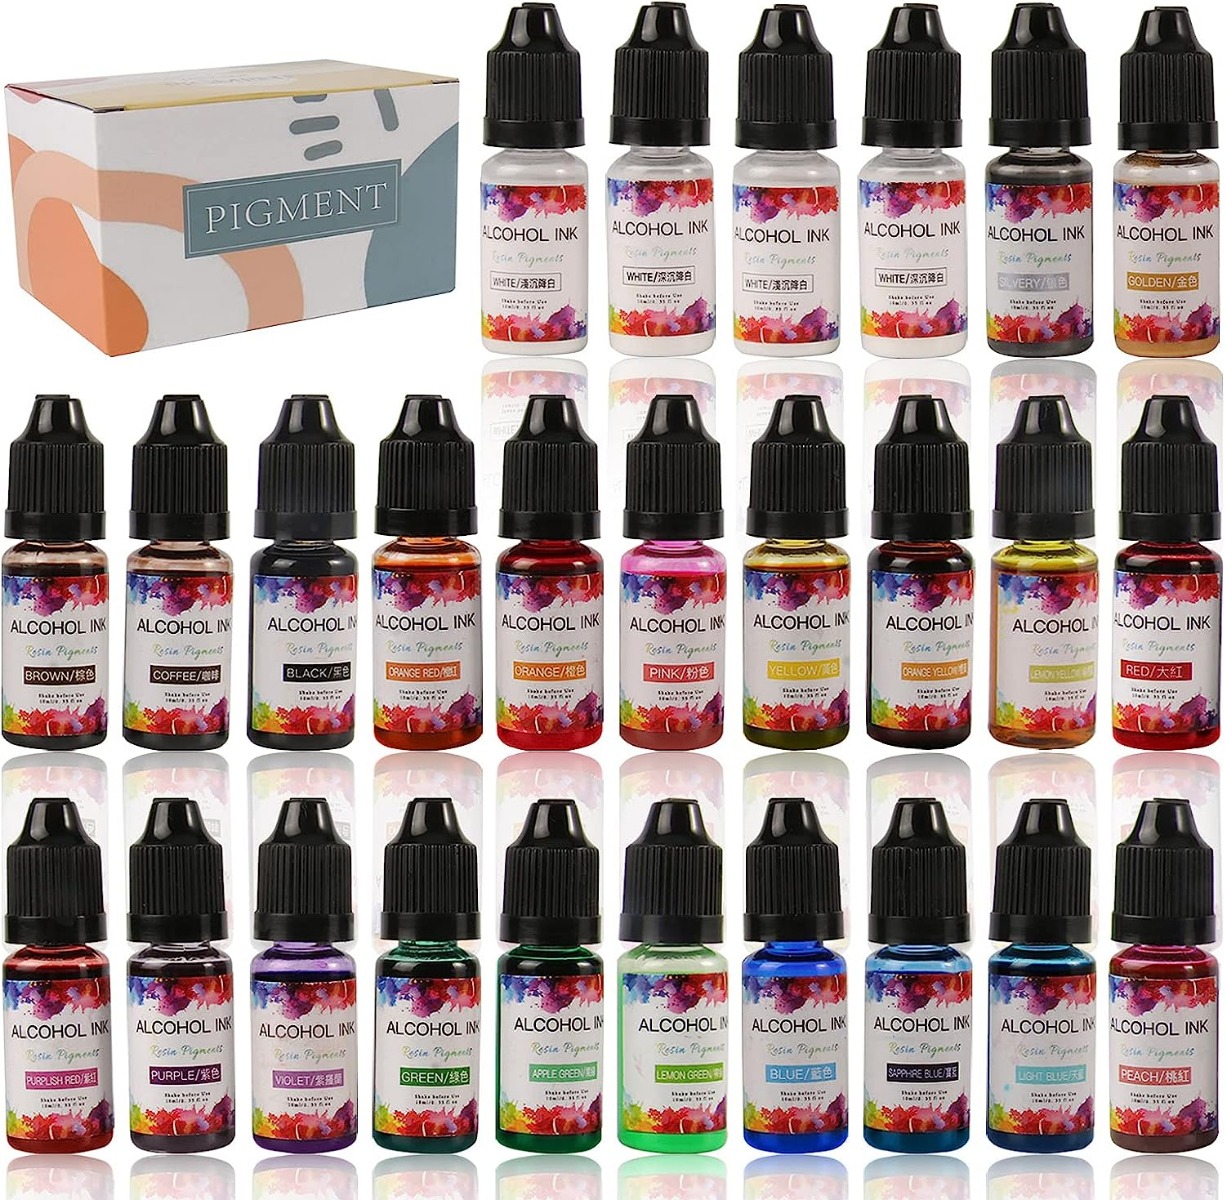 Resin art alcohol special 3d coloring set of 10ml x 24 colors